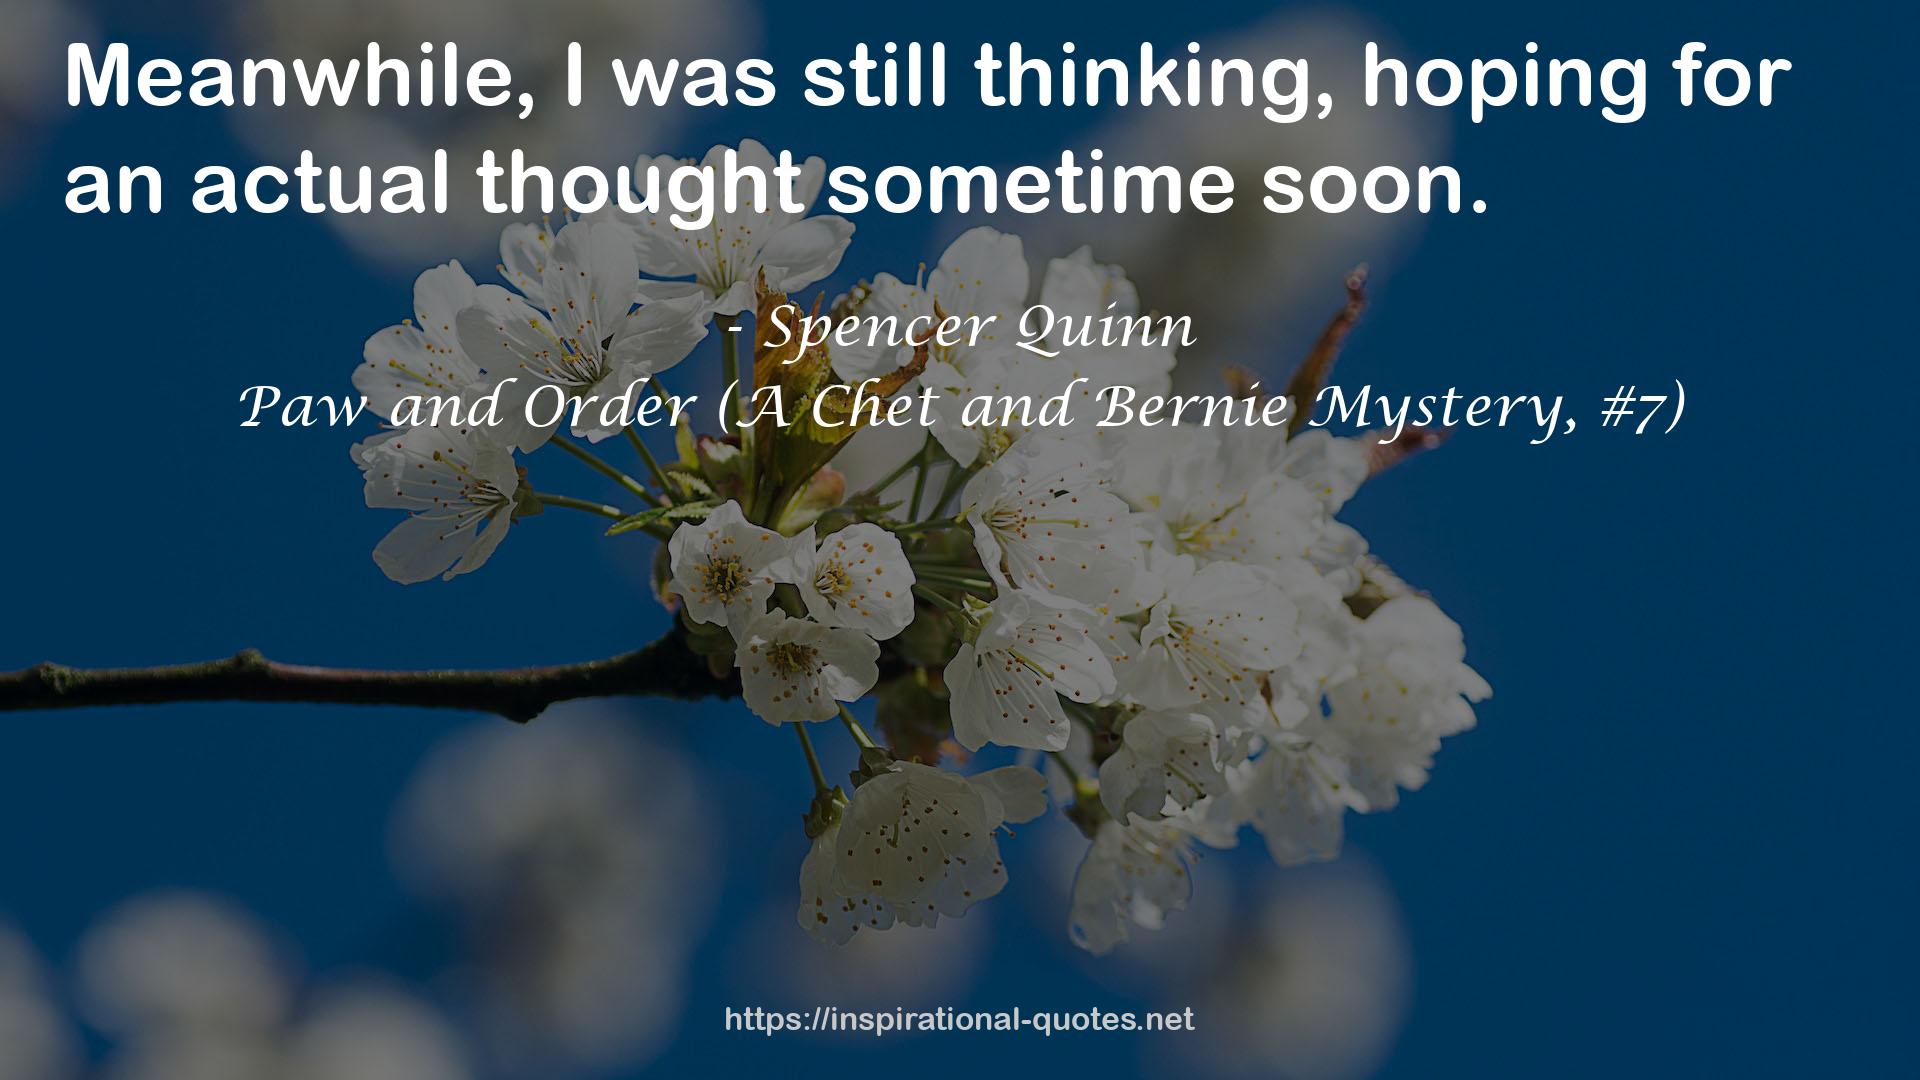 Paw and Order (A Chet and Bernie Mystery, #7) QUOTES